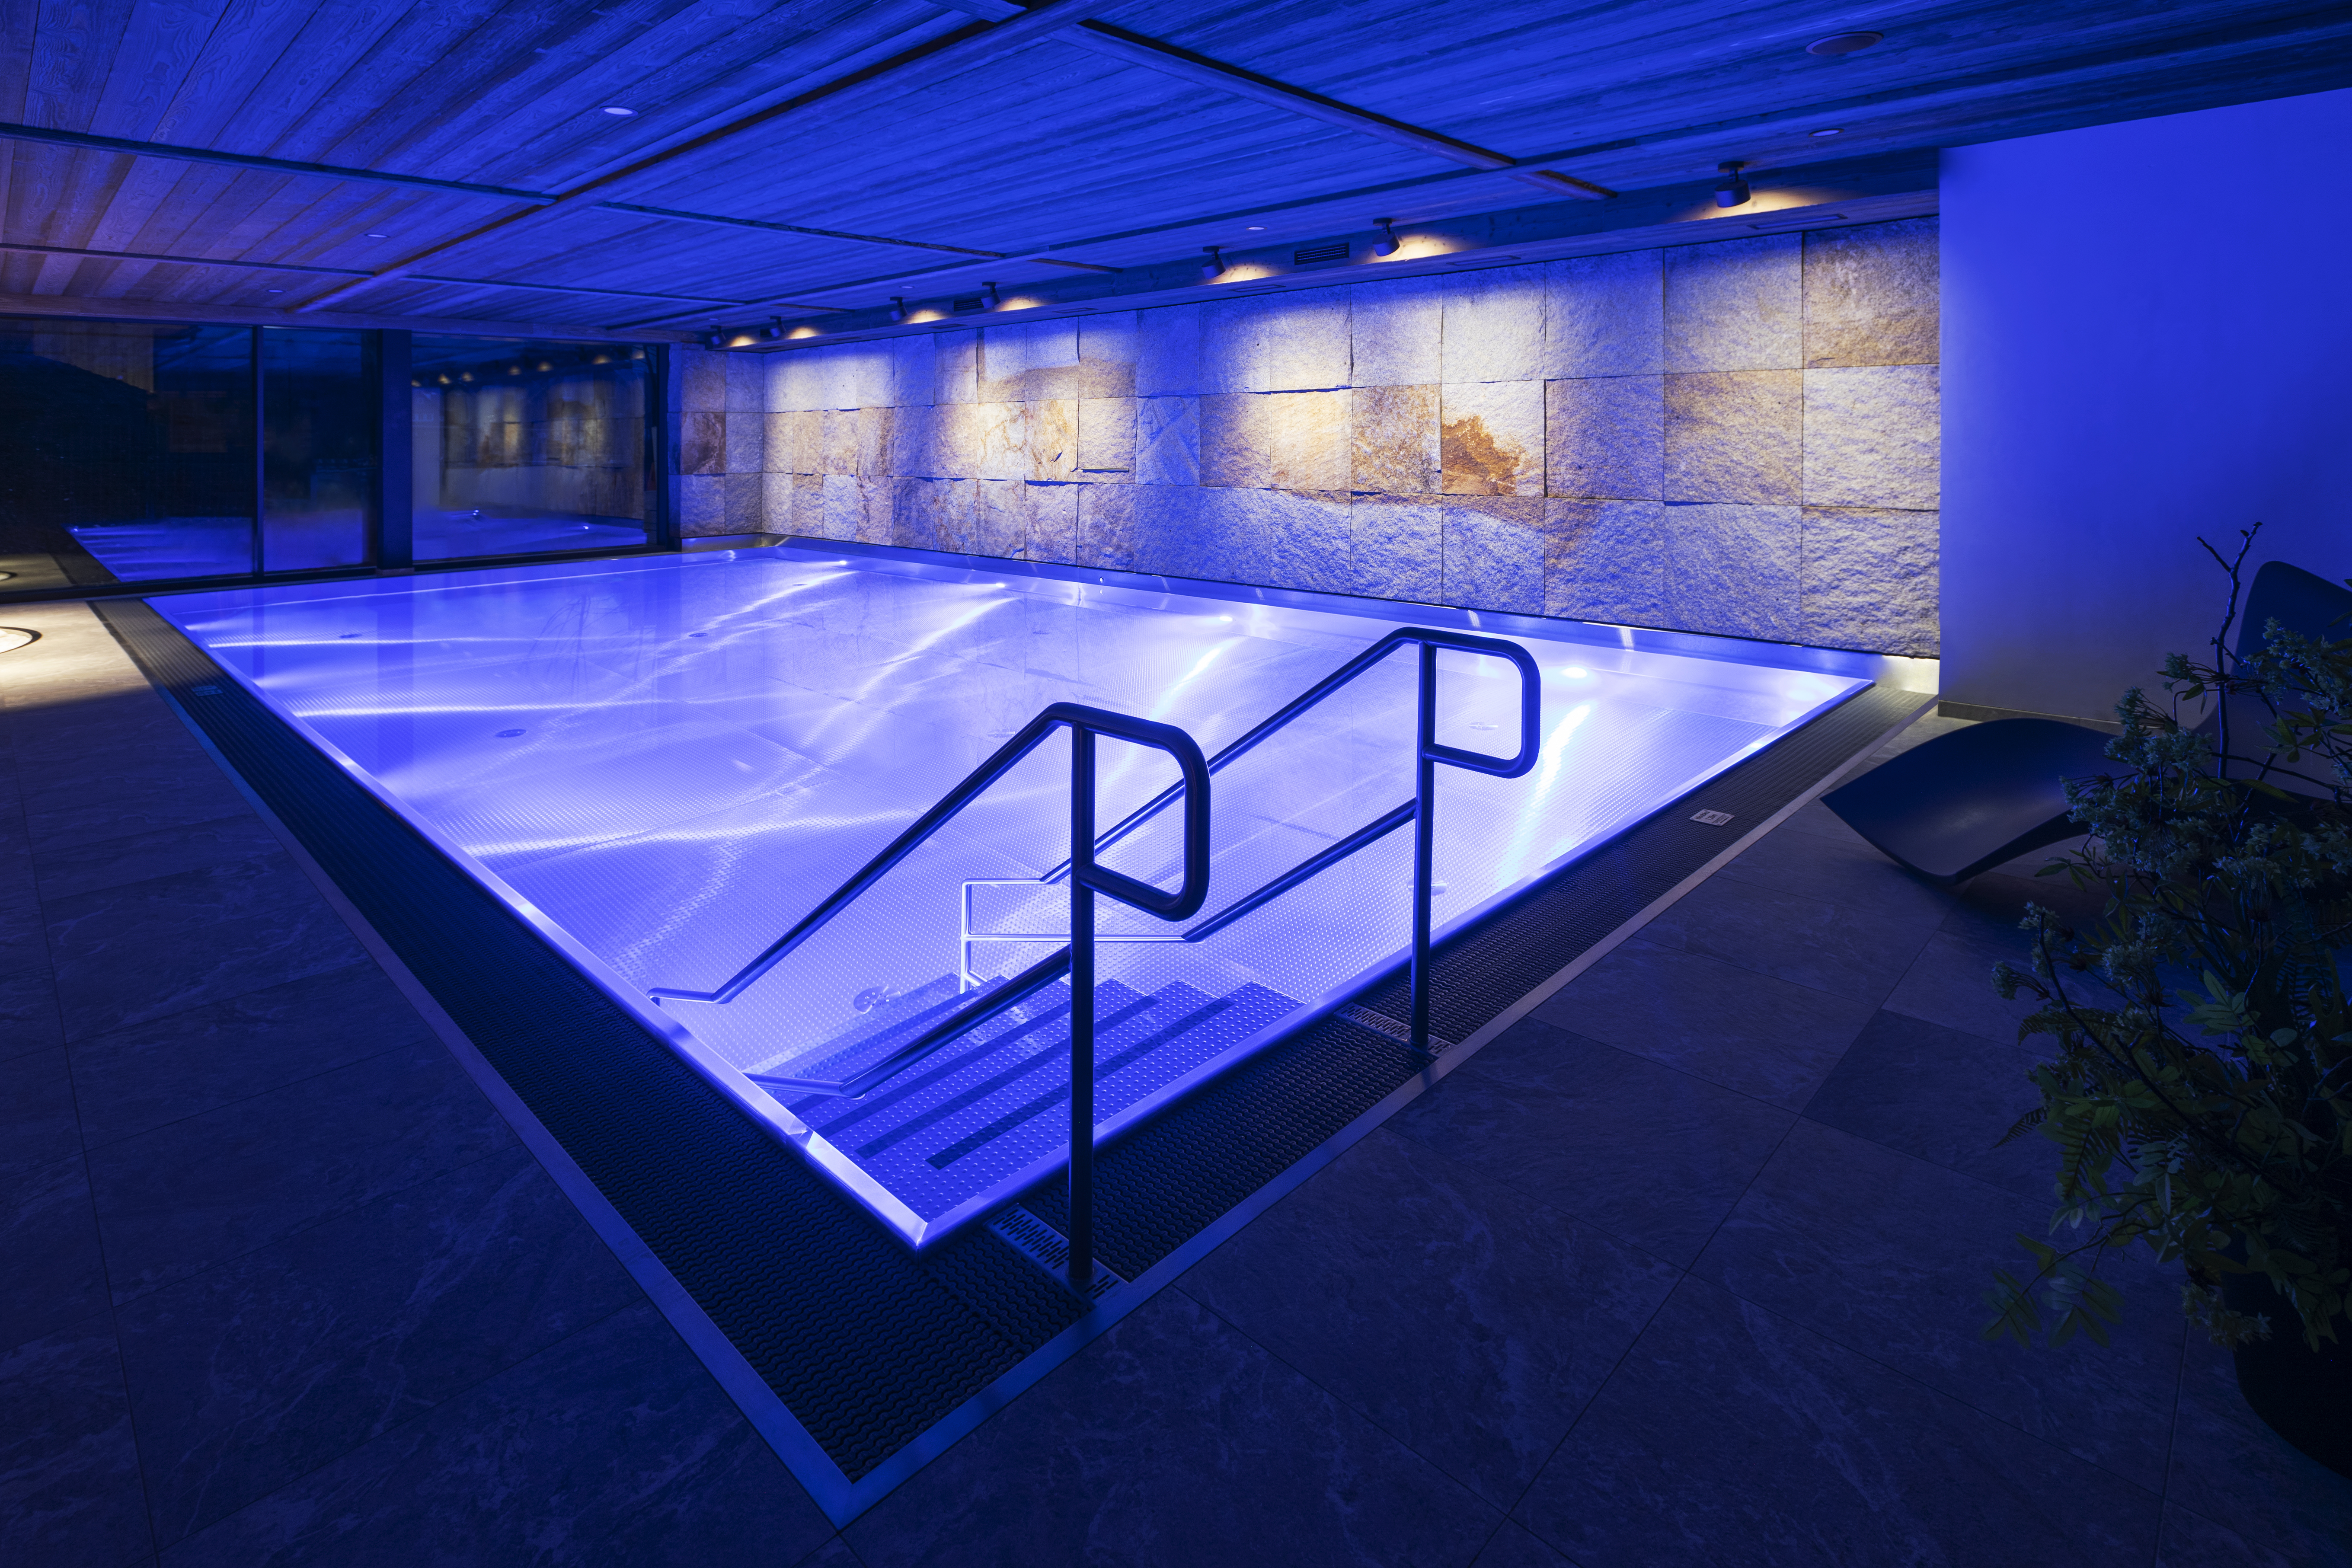 iluminated IMAGINOX stainless steel pool in a commercial wellness